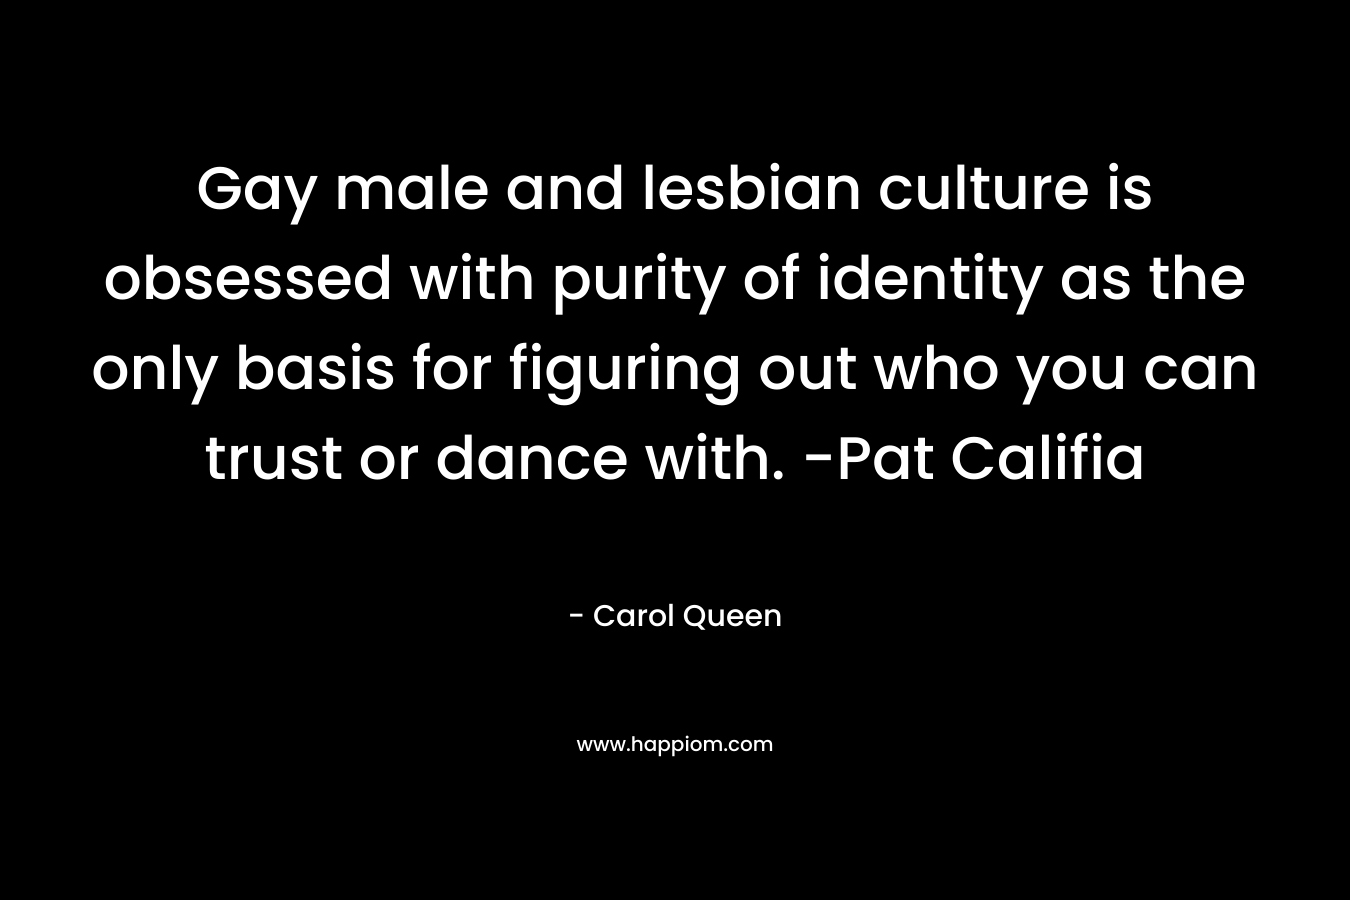 Gay male and lesbian culture is obsessed with purity of identity as the only basis for figuring out who you can trust or dance with. -Pat Califia – Carol Queen